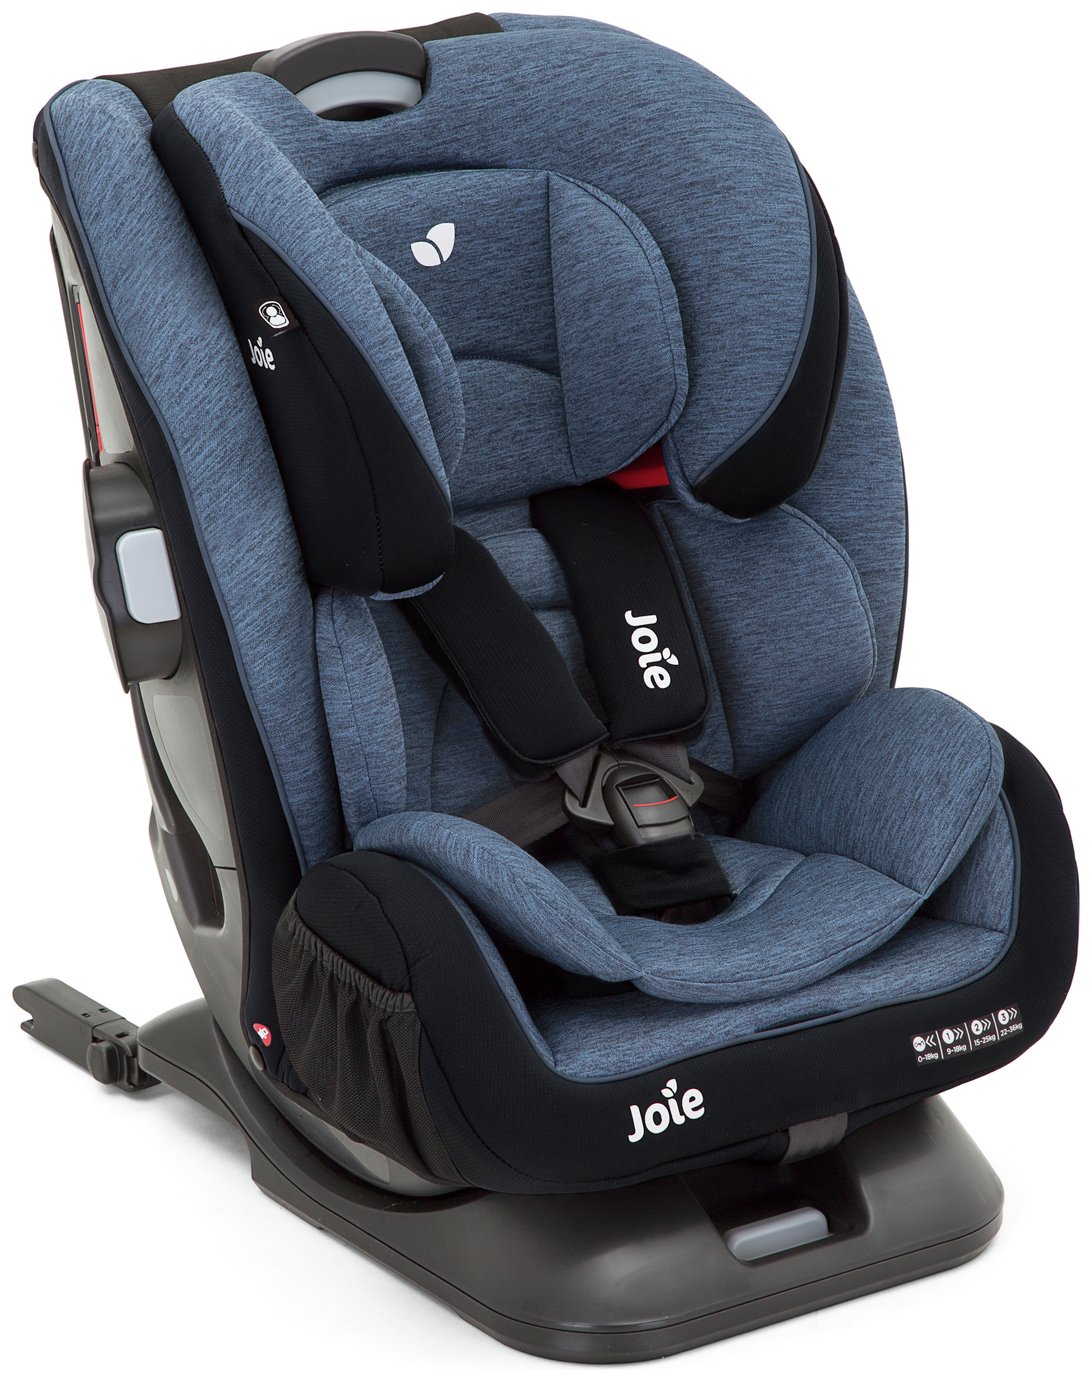 Joie Everystage FX Group 0+/1/2/3 Car Seat - Navy